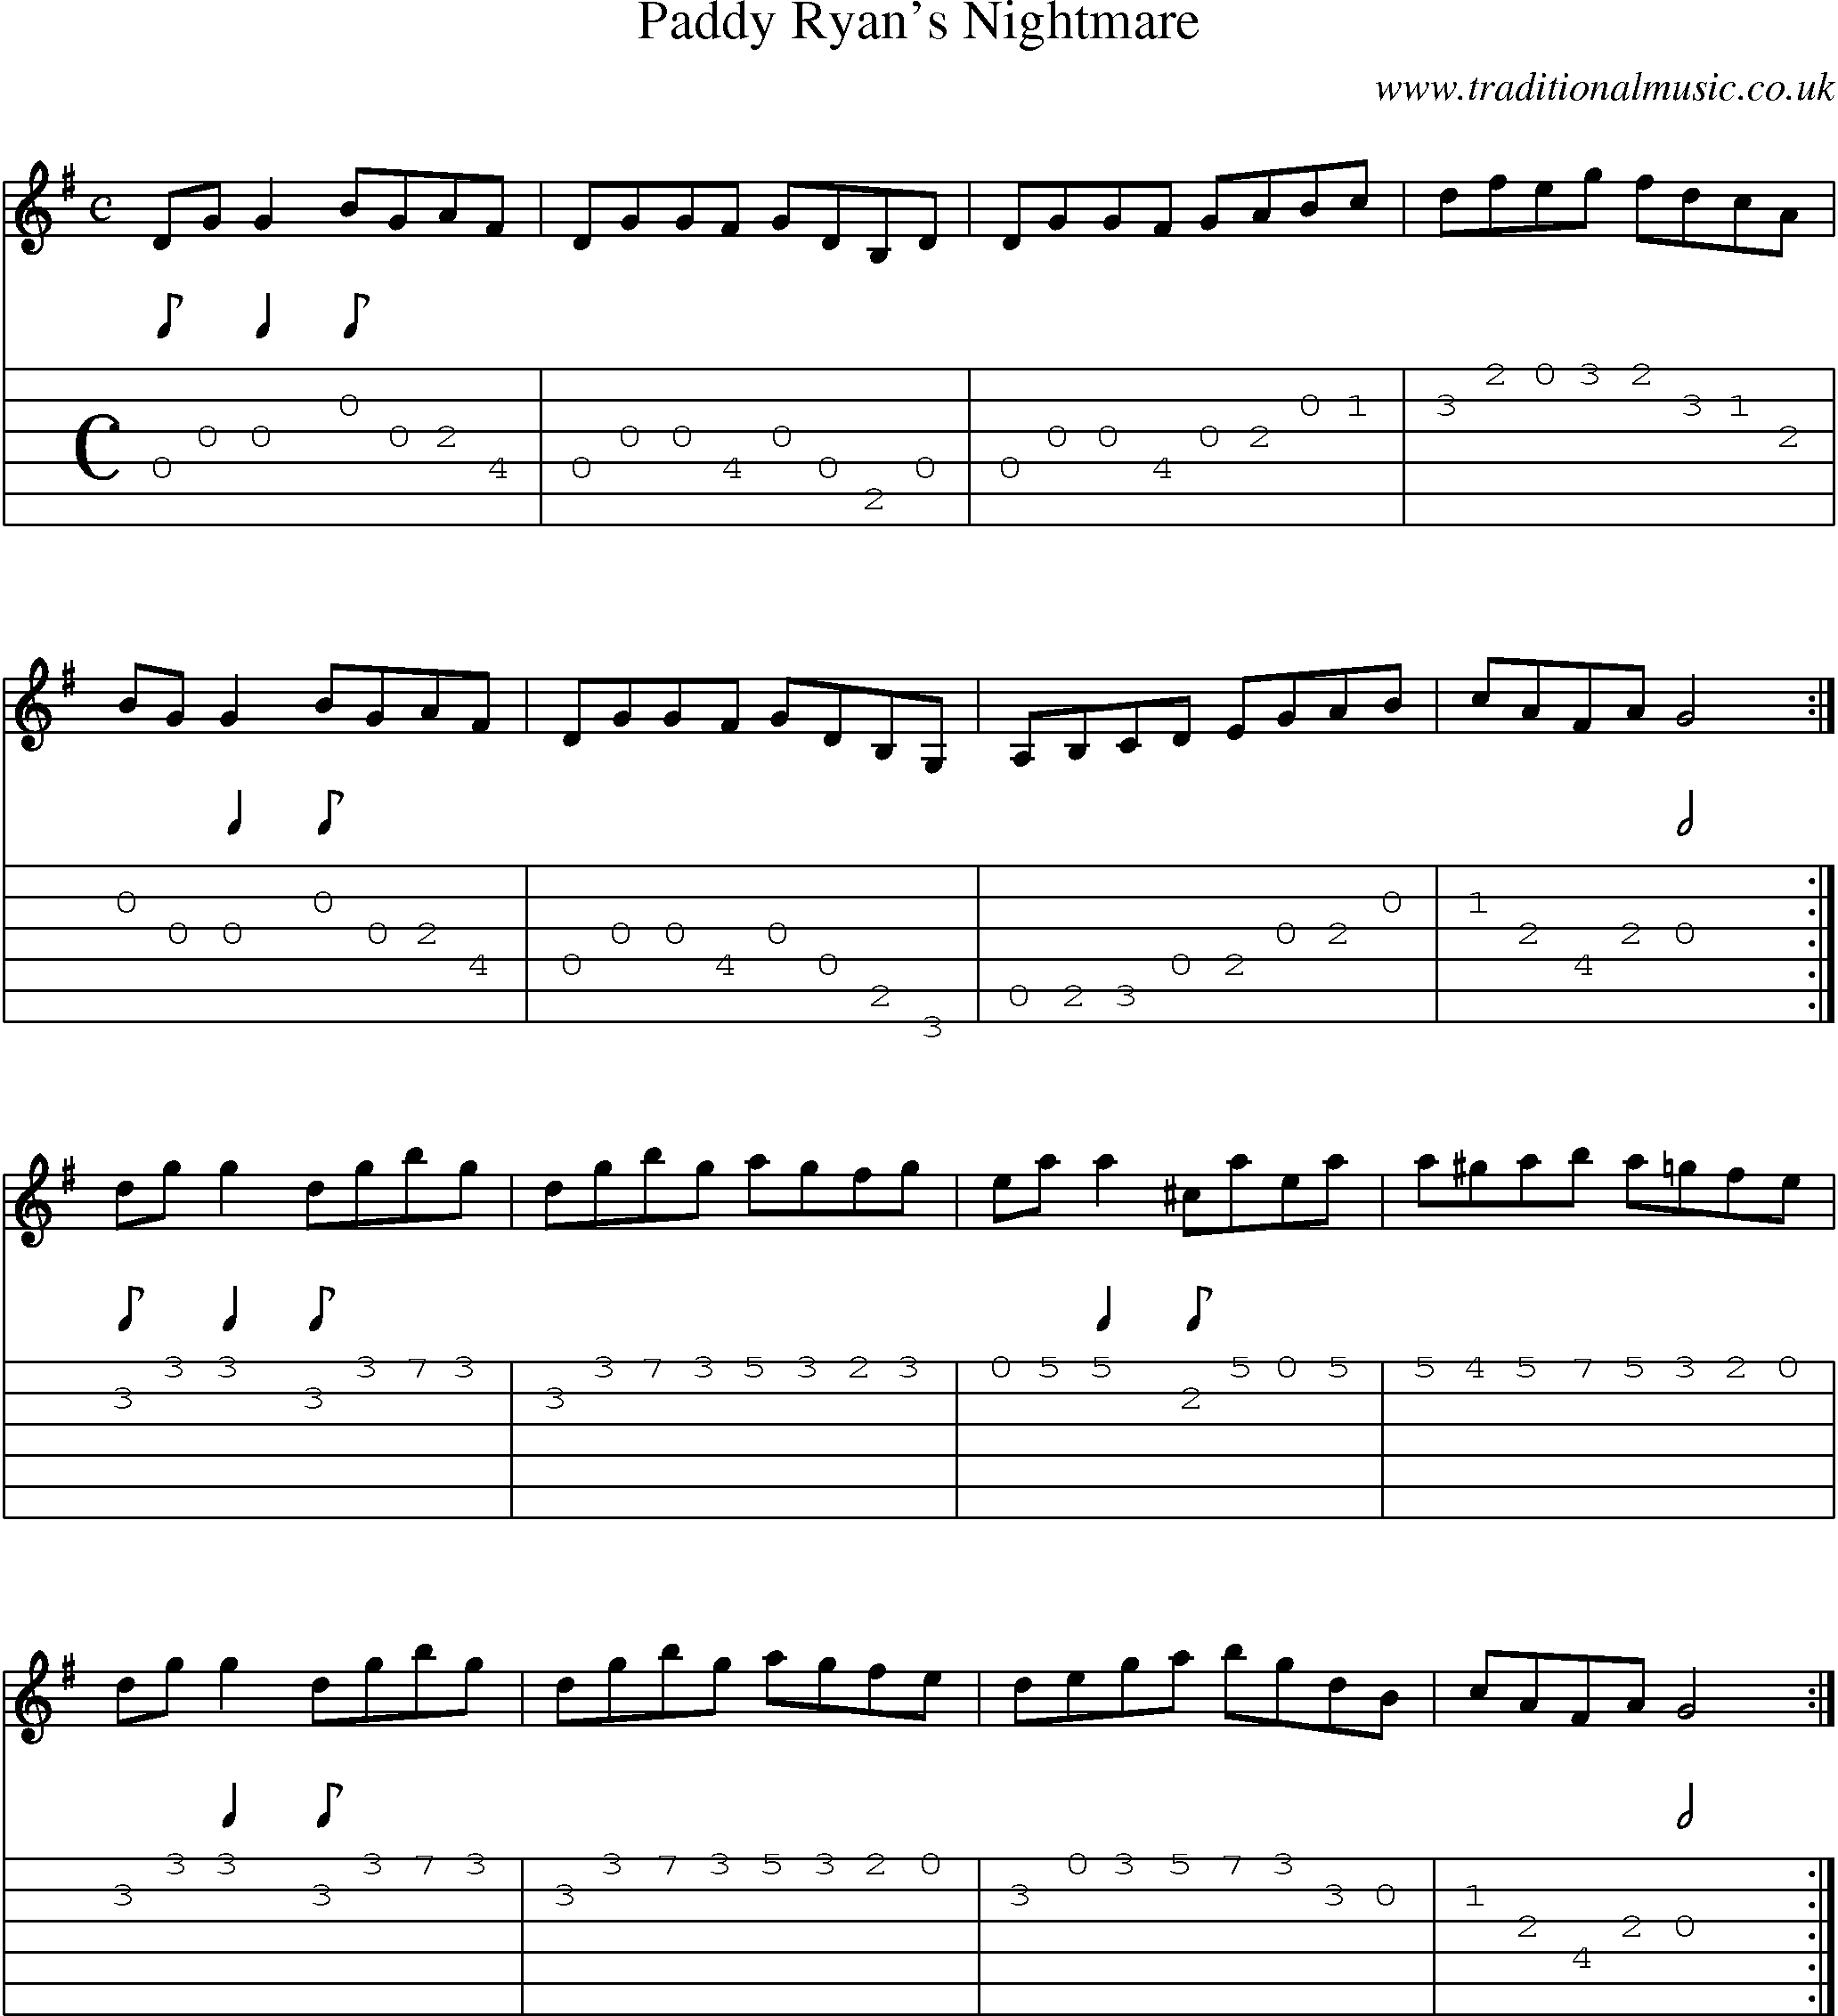 Music Score and Guitar Tabs for Paddy Ryans Nightmare